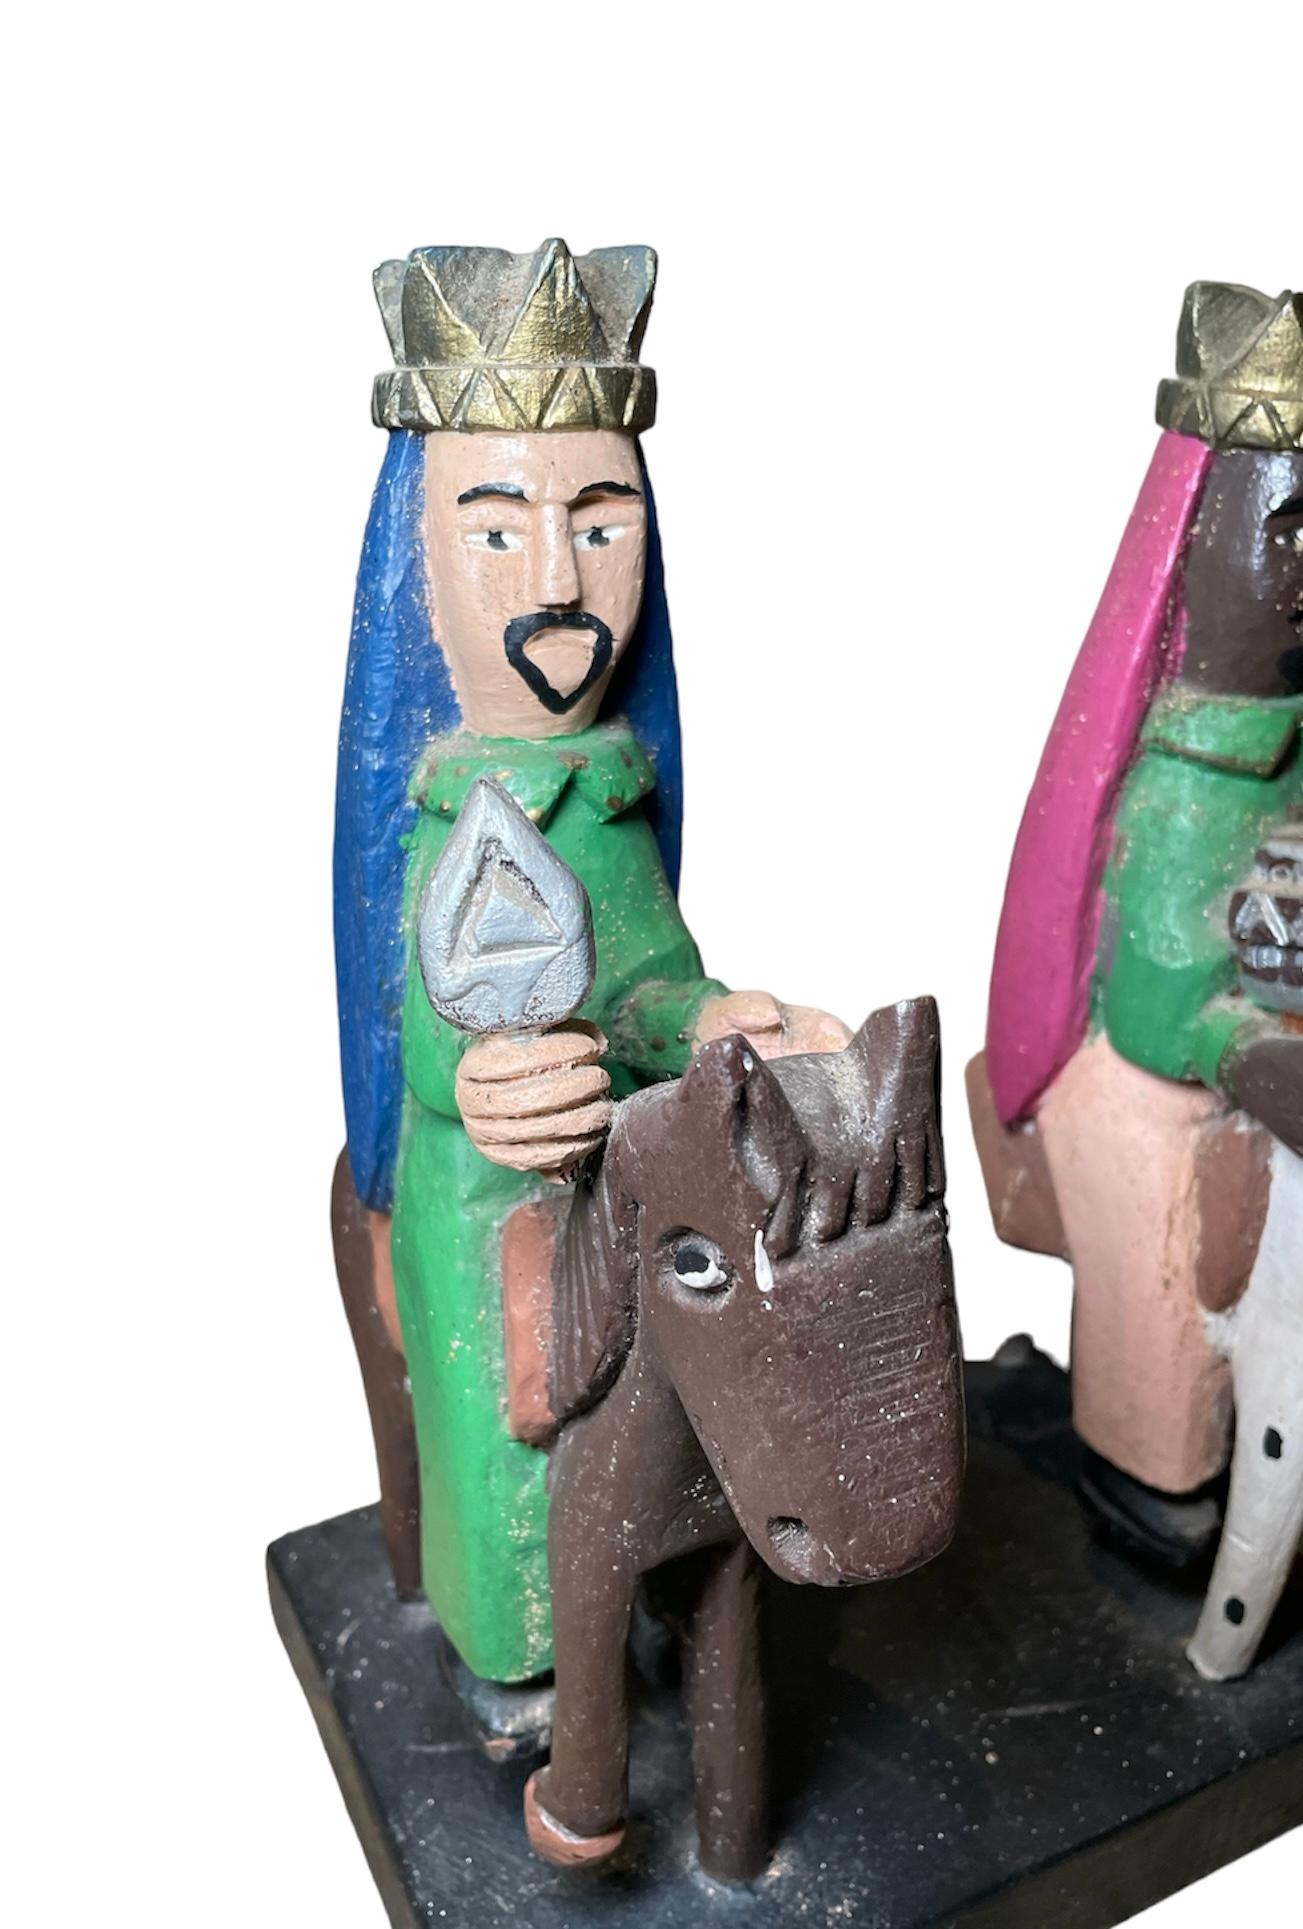 A renown tradition in Puerto Rico is the making of Santos de Palos by masters carvers since the 19th century. They hand carved and painted the saints inspired in their personal religious devotion. This is a Puerto Rican Wood Carved Sculptures of the